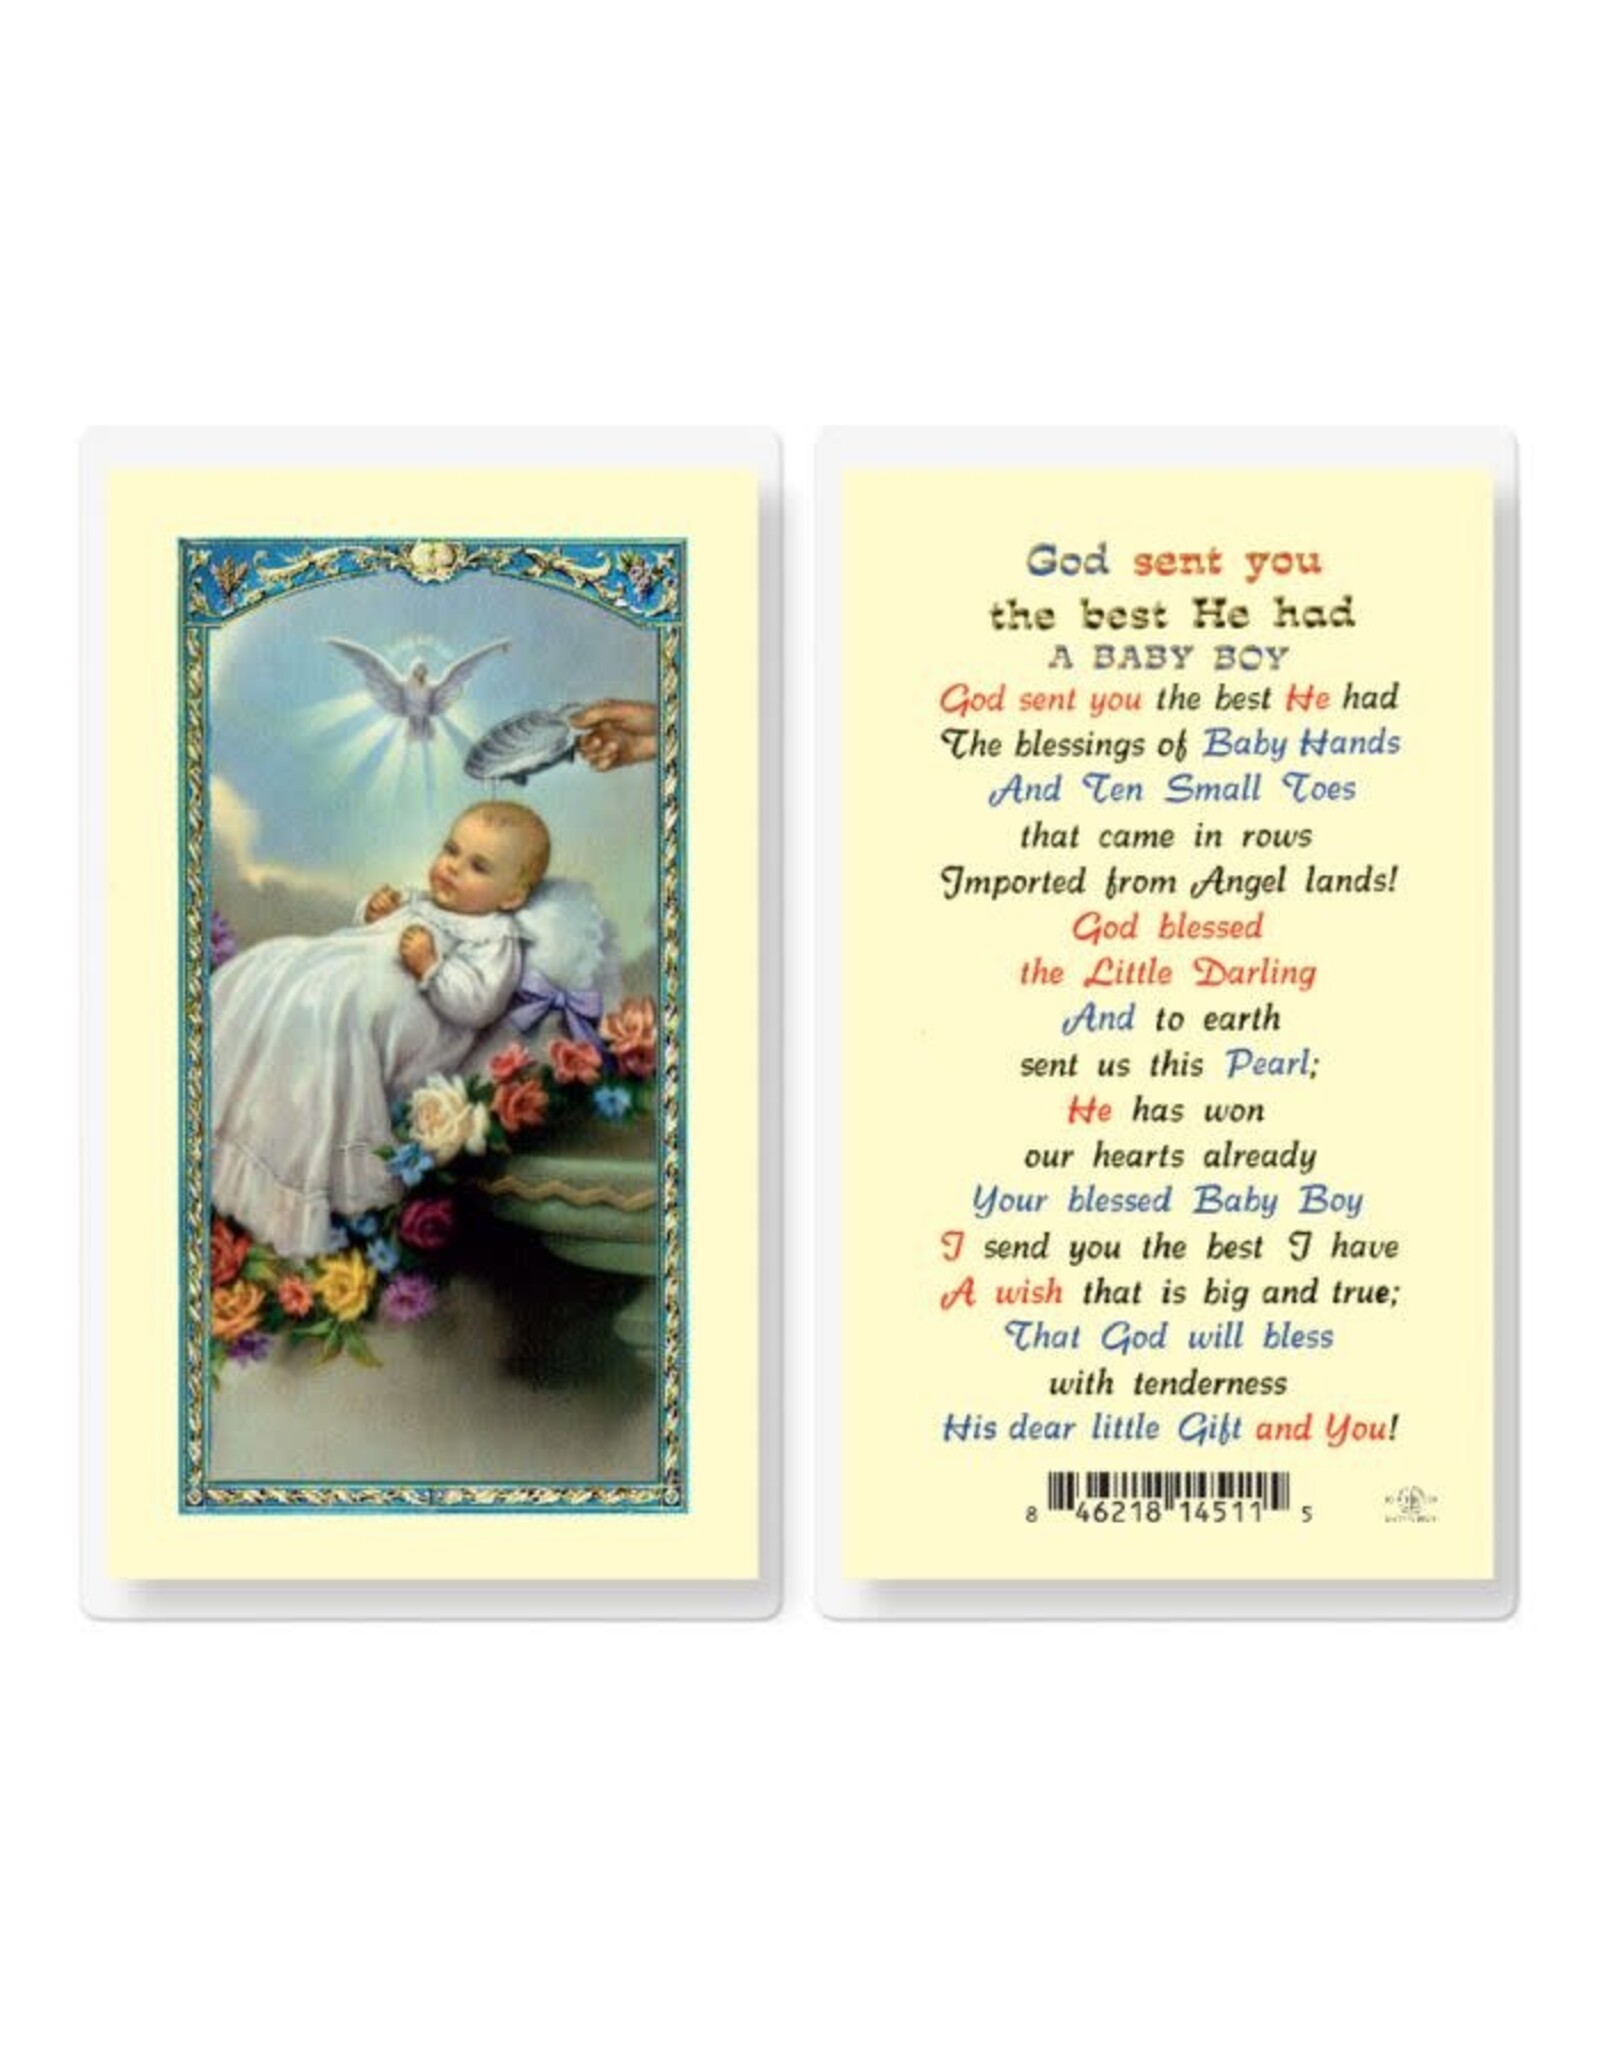 Hirten Holy Card, Laminated -Baptism with God Sent You the Best He Had a Baby Boy